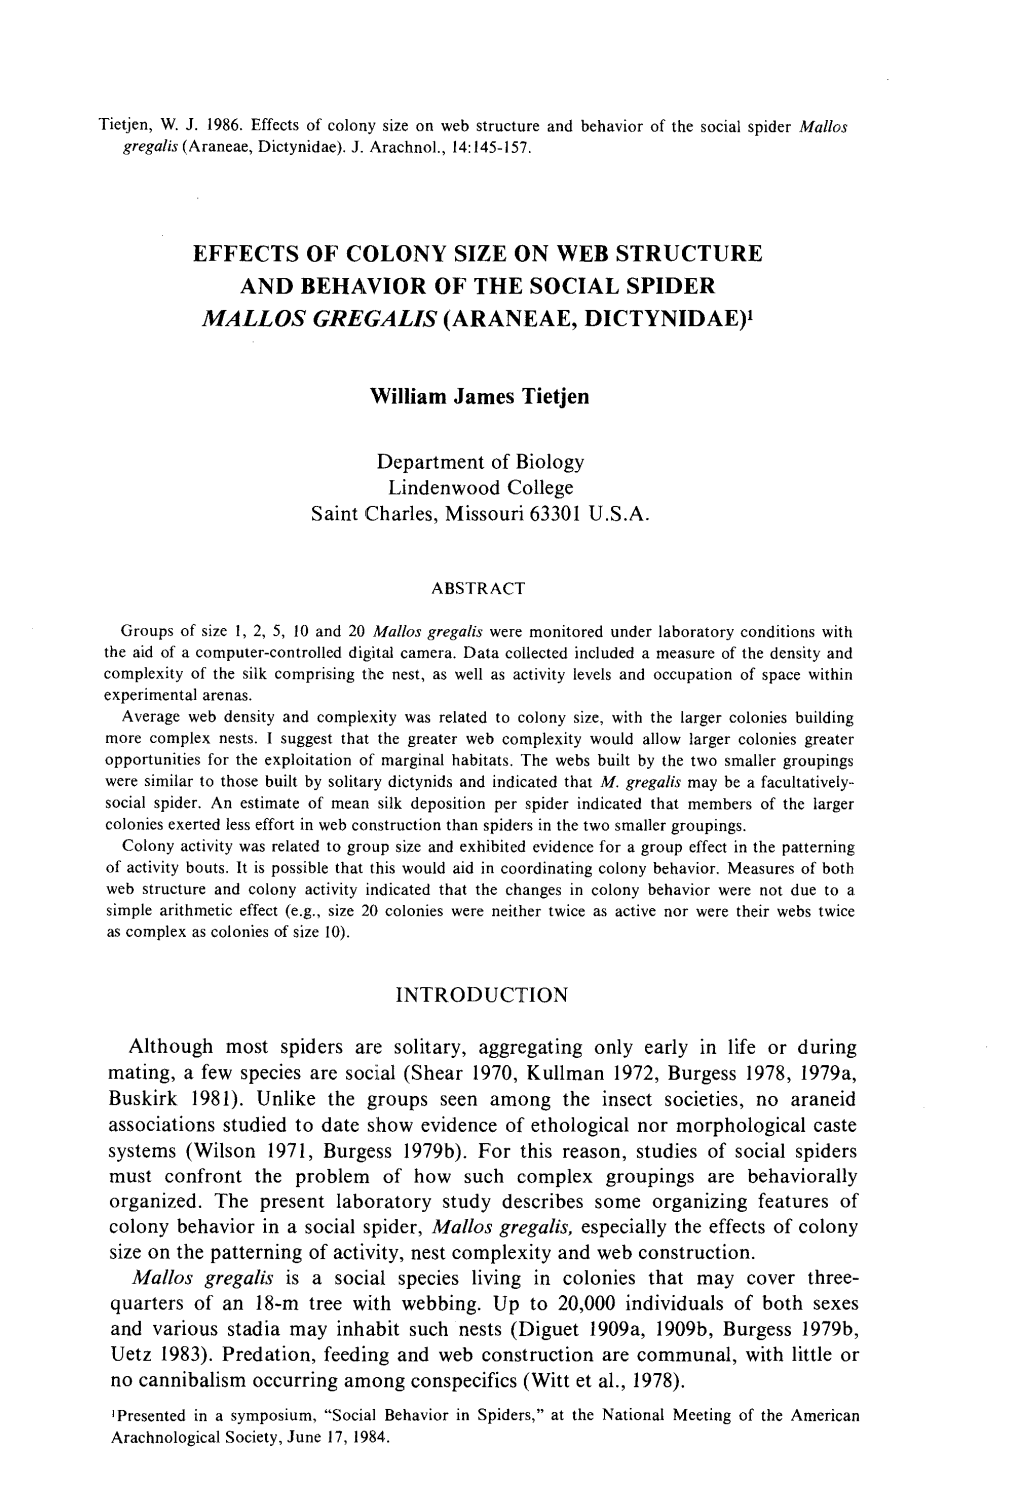 EFFECTS of COLONY SIZE on WEB STRUCTURE and BEHAVIOR of the SOCIAL SPIDE R MALLOS GREGALIS (ARANEAE, DICTYNIDAE)1 William James